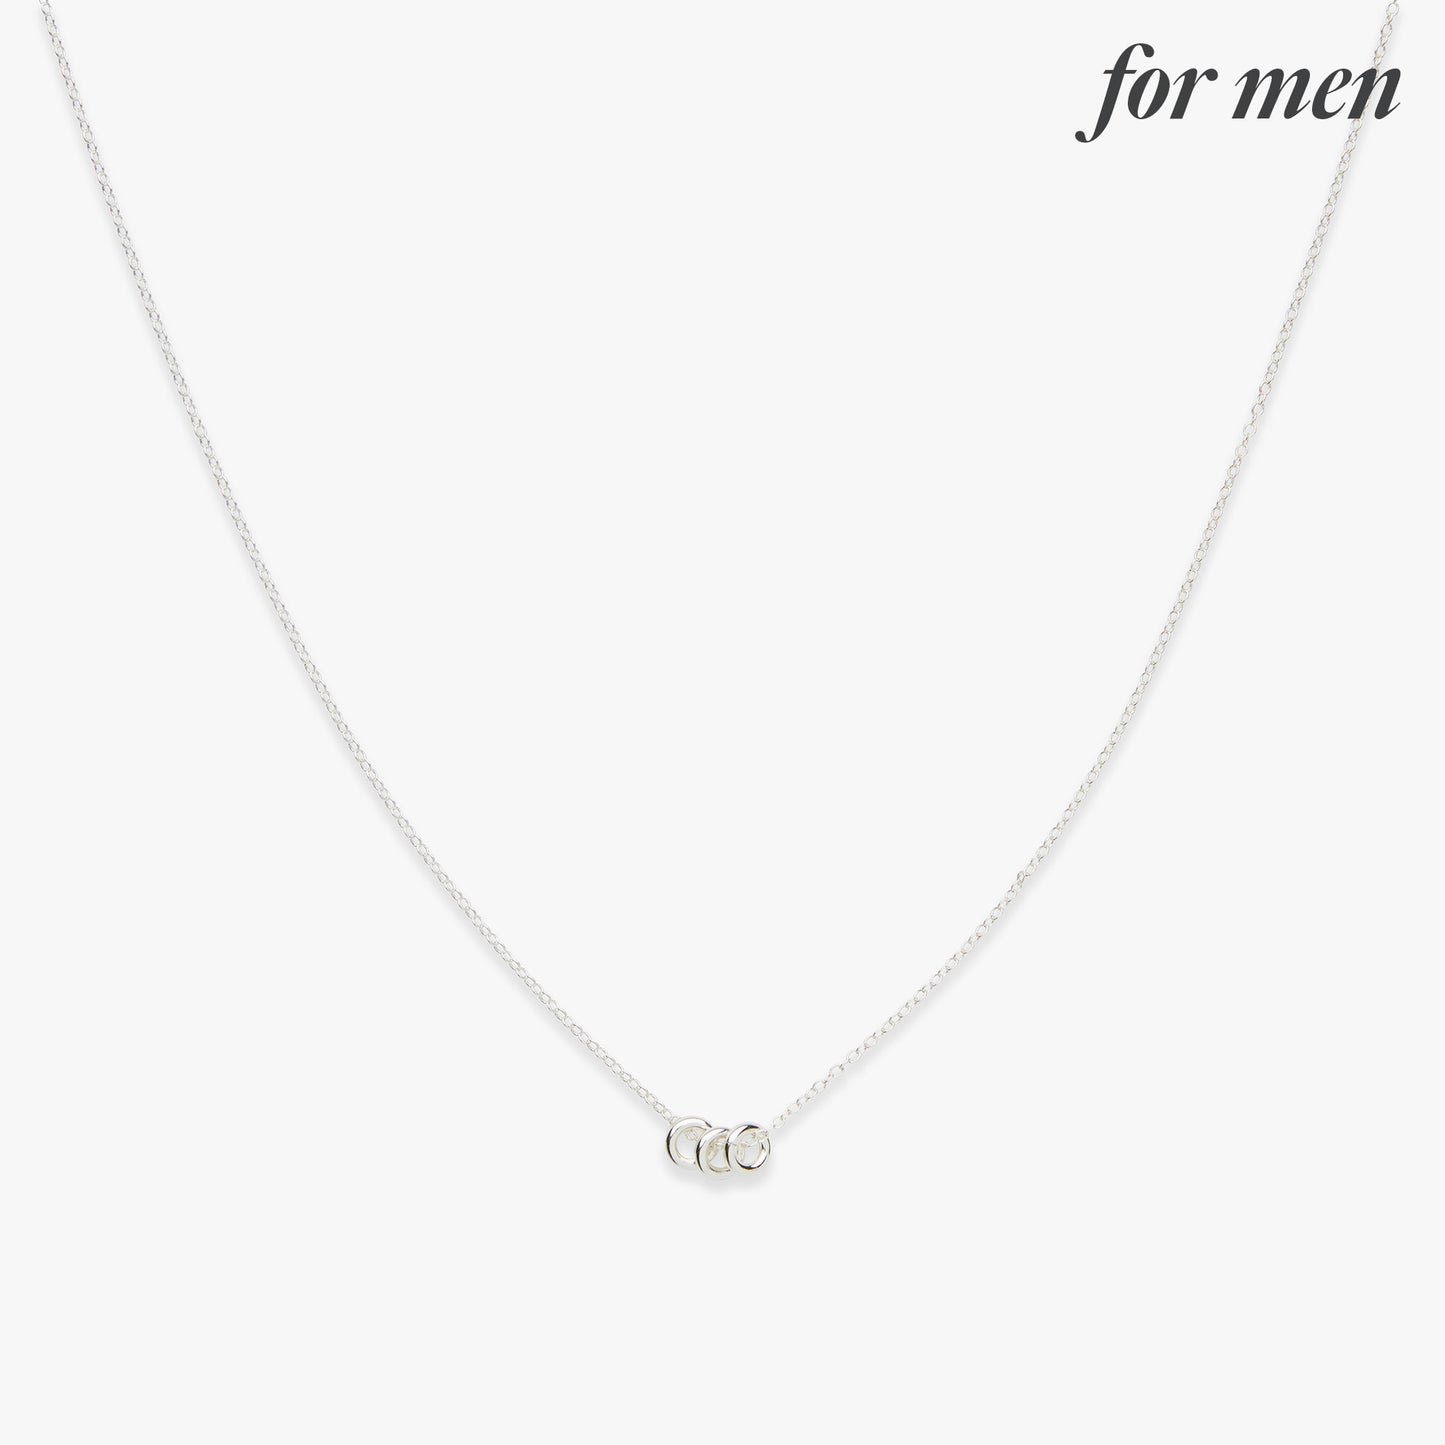 Three rings necklace silver for men